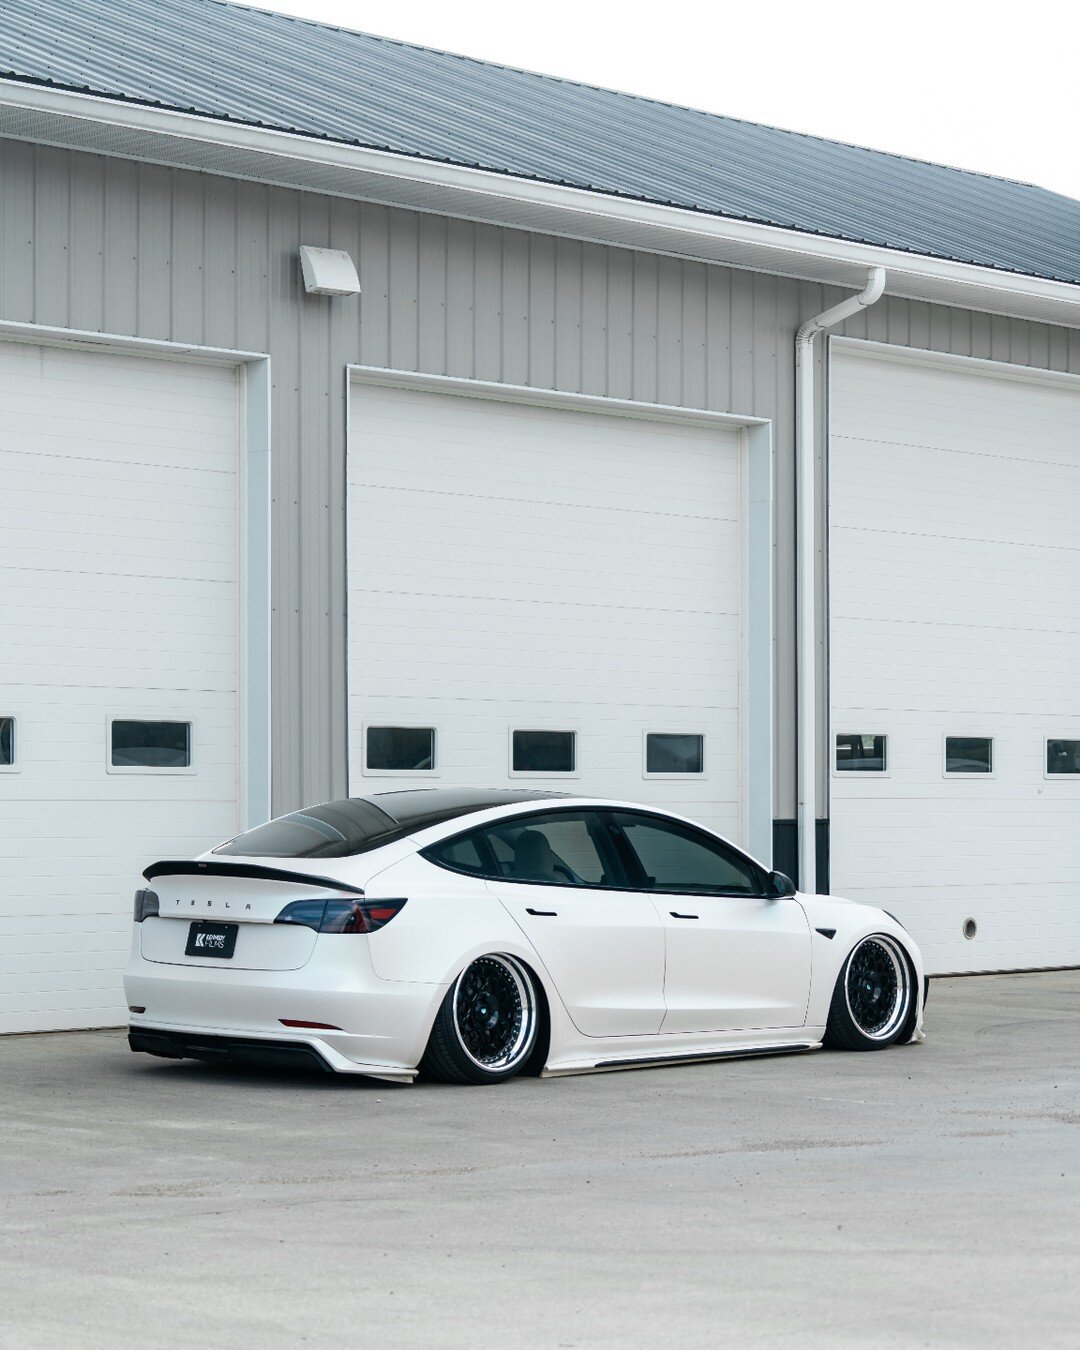 Today is your last chance to take advantage of 20% off Airlift Products.

Contact us today and let us help get you right! 

 #slammed  #airliftperformance  #lowered  #loweredlifestyle  #loweredcars  #Tesla  #carlifestyle  #stance  #stancenation  #sta